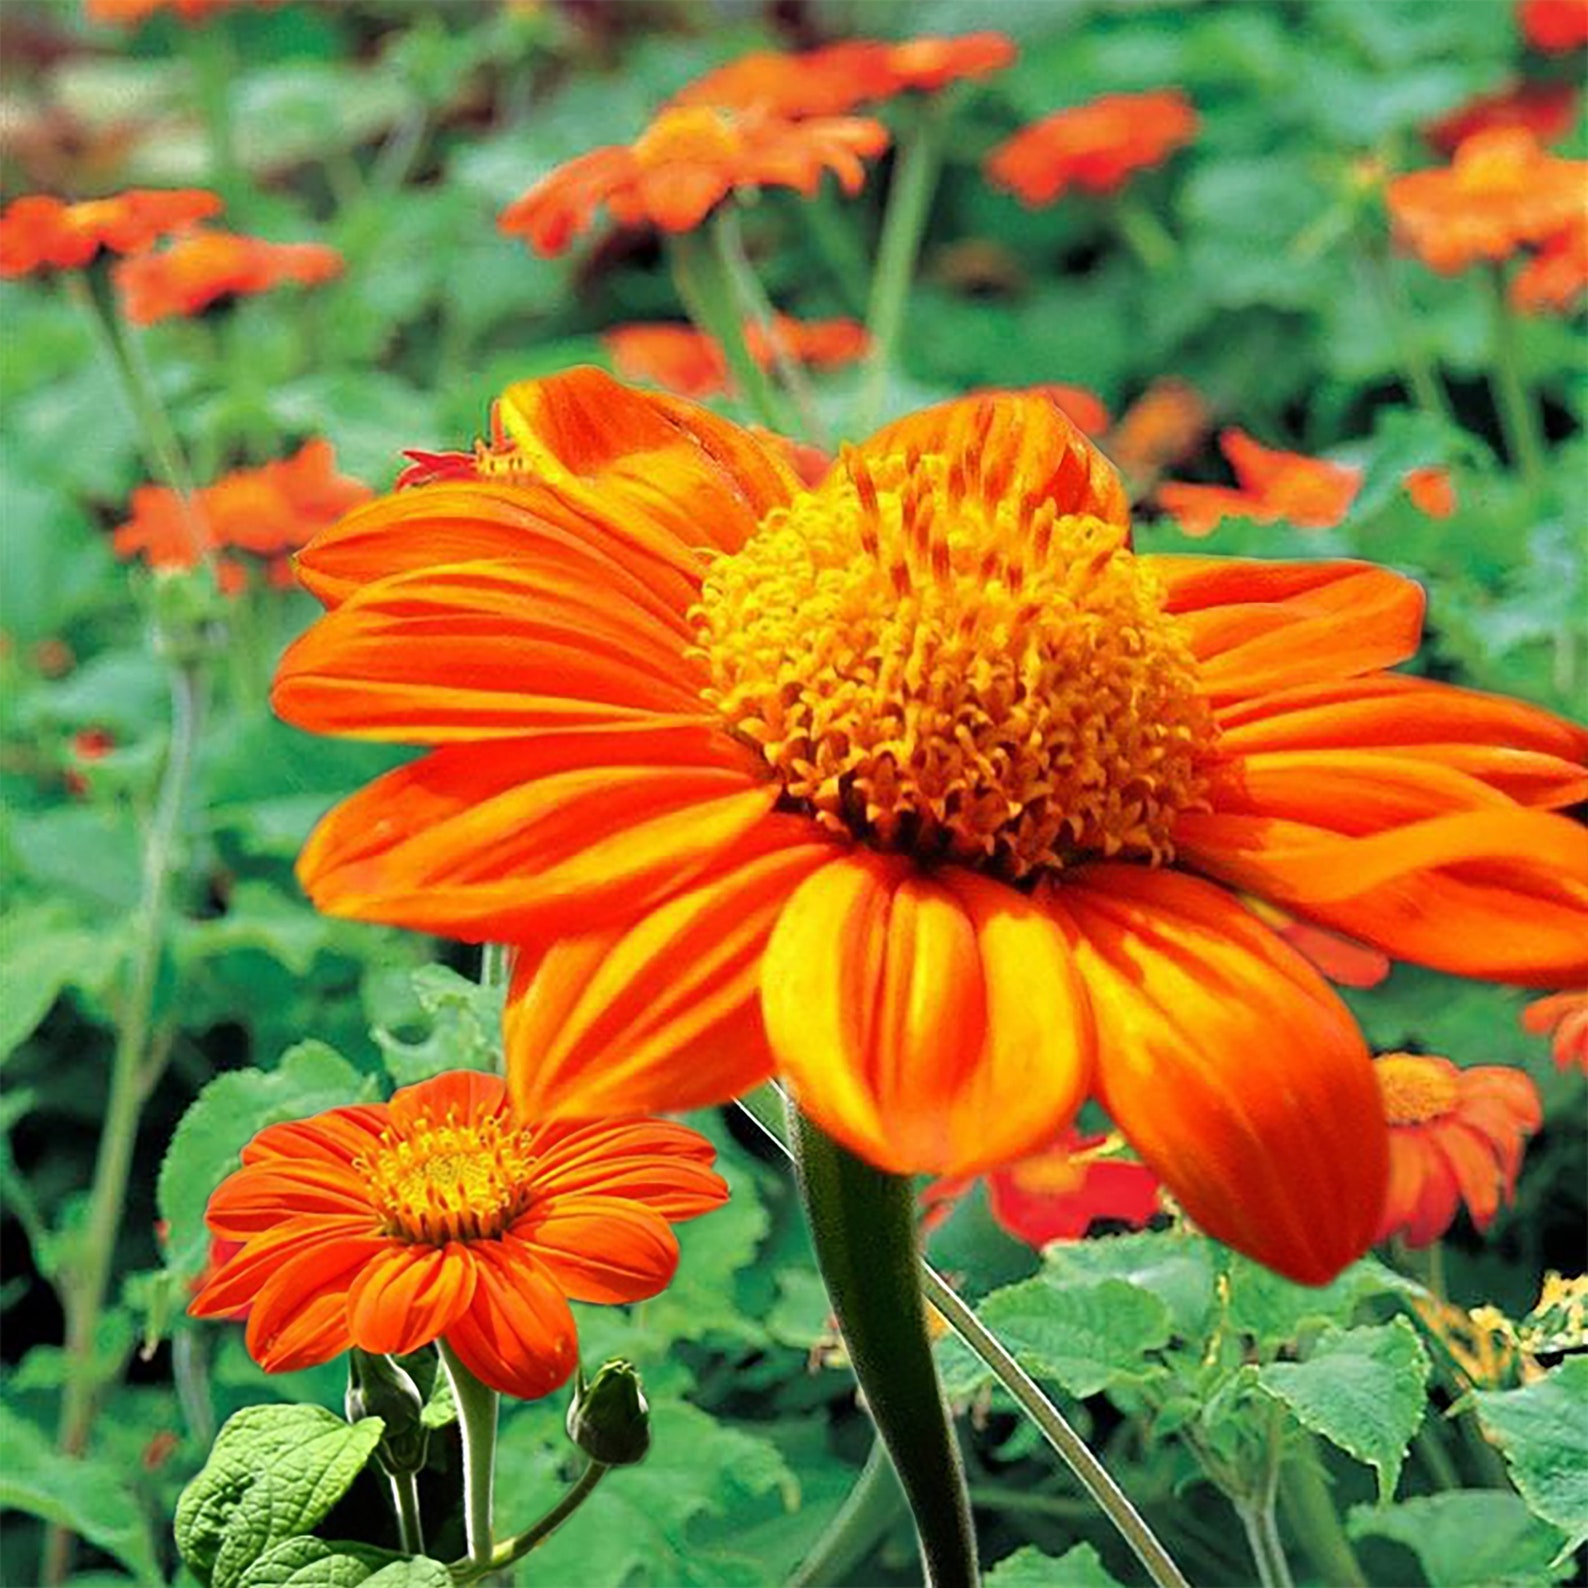 Mexican Sunflower Tithonia Rotundifolia Red Sunflower 50 | Etsy